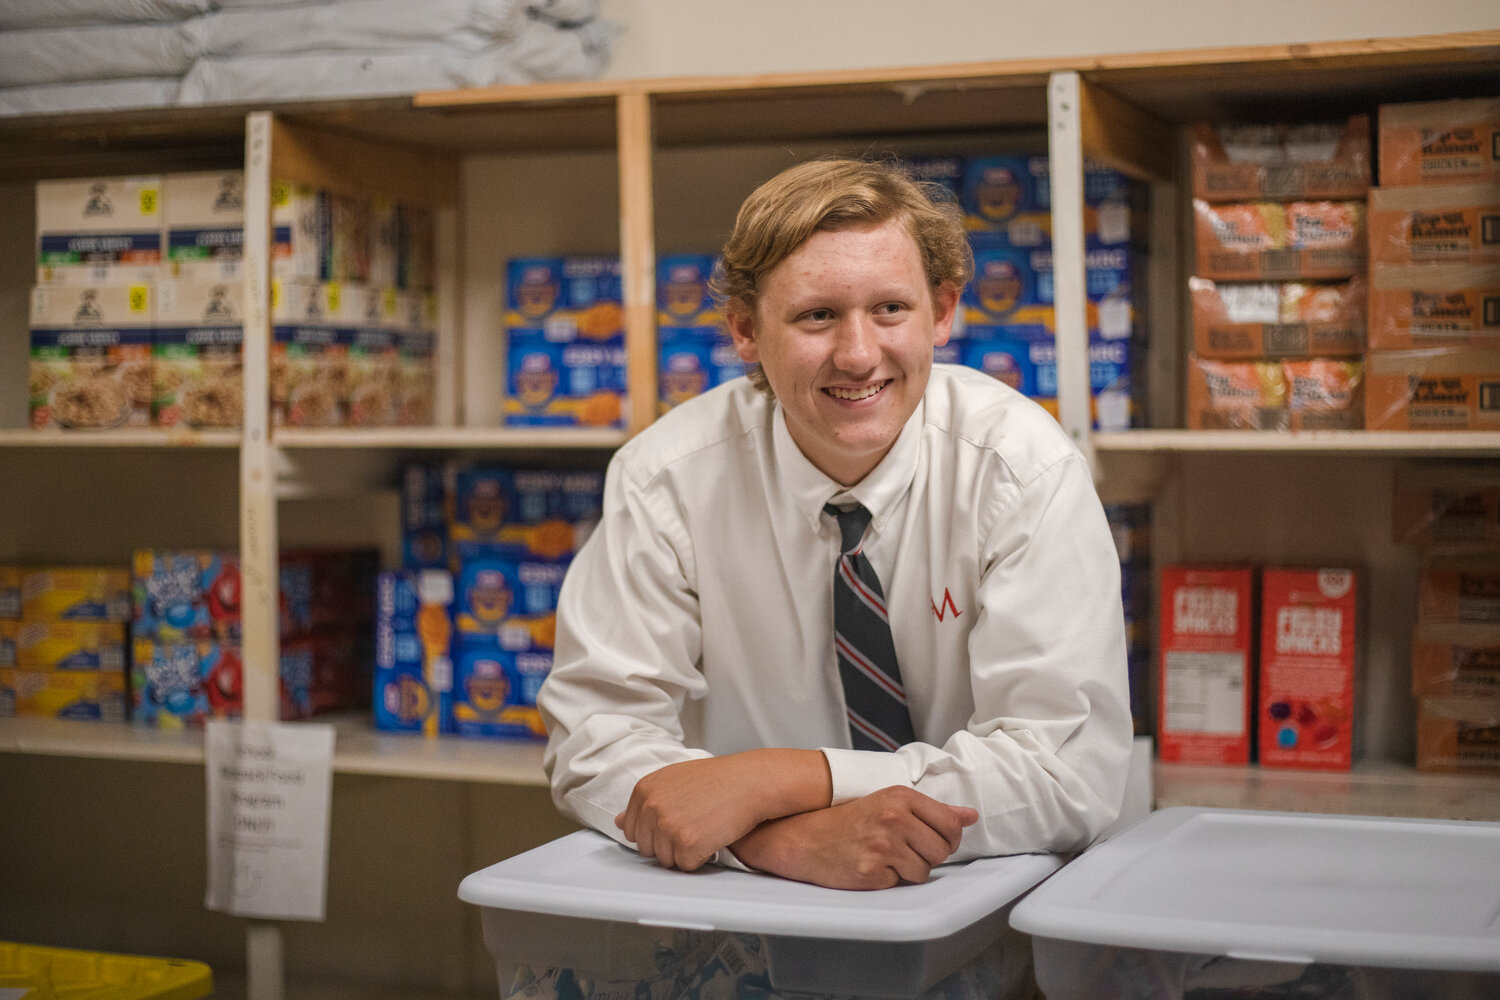 Austin Gontraski, seen here at Catholic Social Services in Robertsdale, held a neighborhood food drive in sixth grade, collecting $400 in cash to buy 1,200 meals. He delivered the food to CSS and has been working with them since.